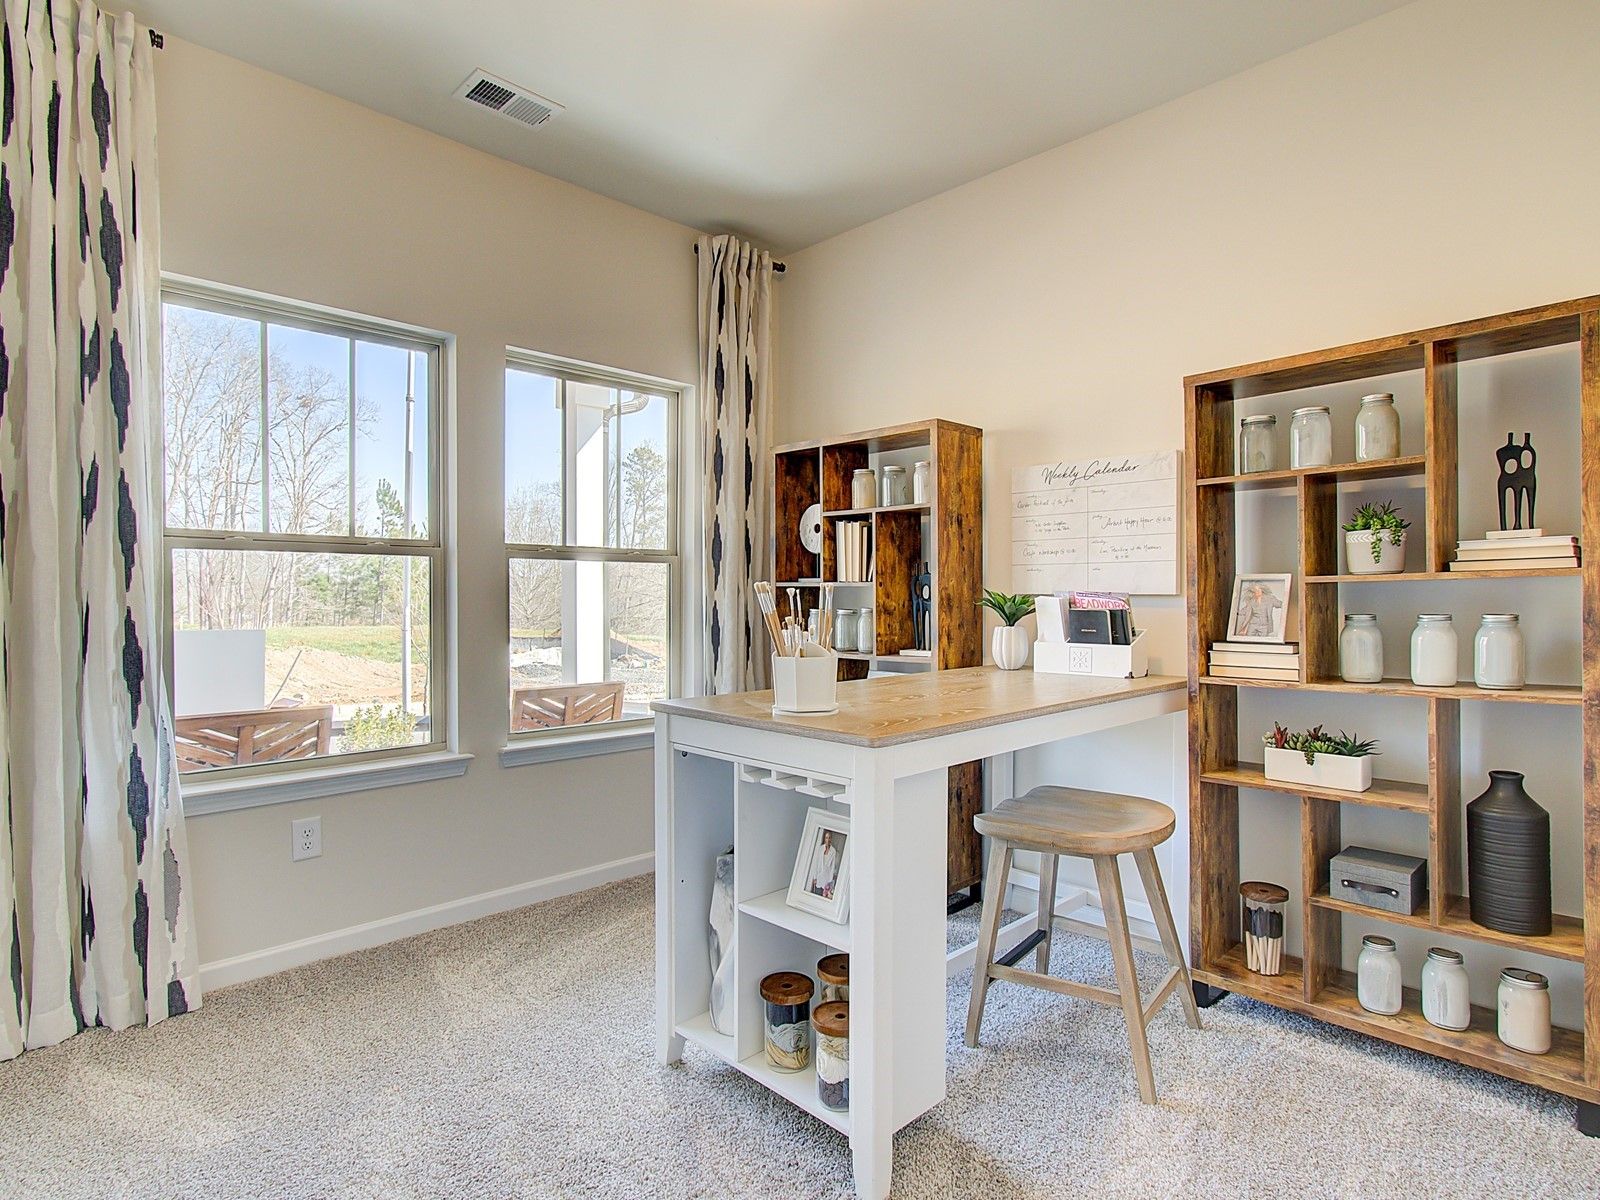 The versatile flex space makes for a great home office or craft room.